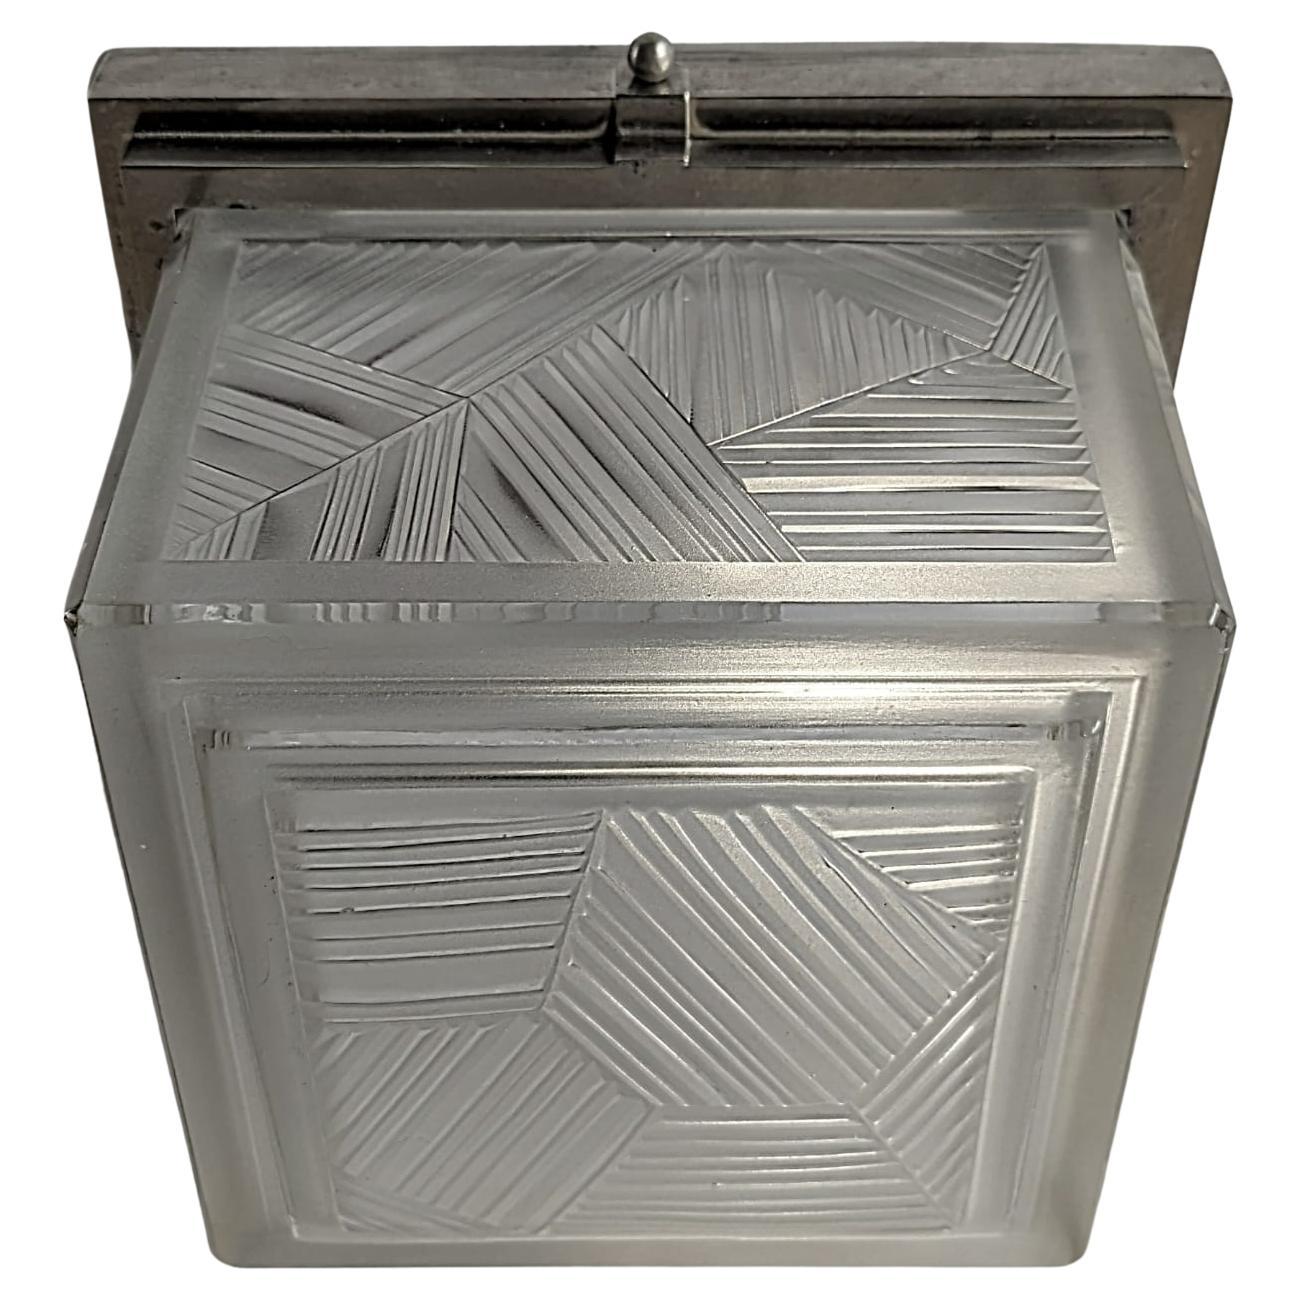 A stunning French Art Deco Square shaped Flush Mount was created in the 1930s by 